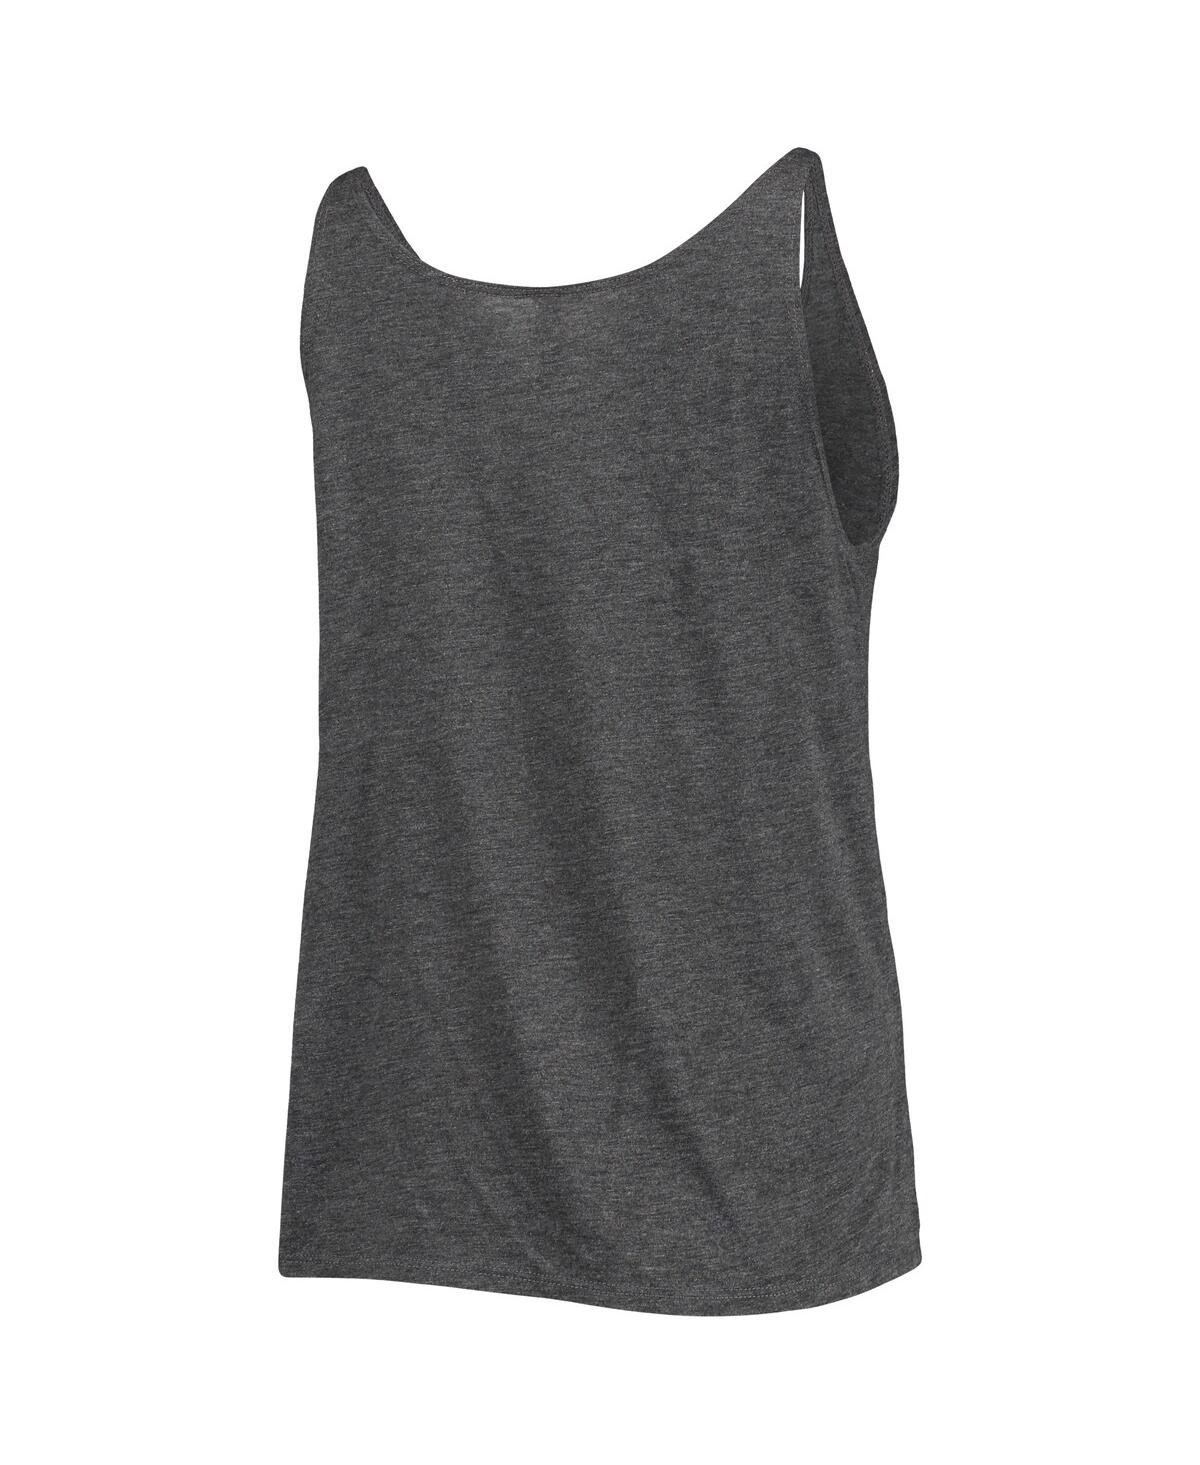 Shop Soft As A Grape Women's  Heathered Charcoal Oakland Athletics Slouchy Tank Top